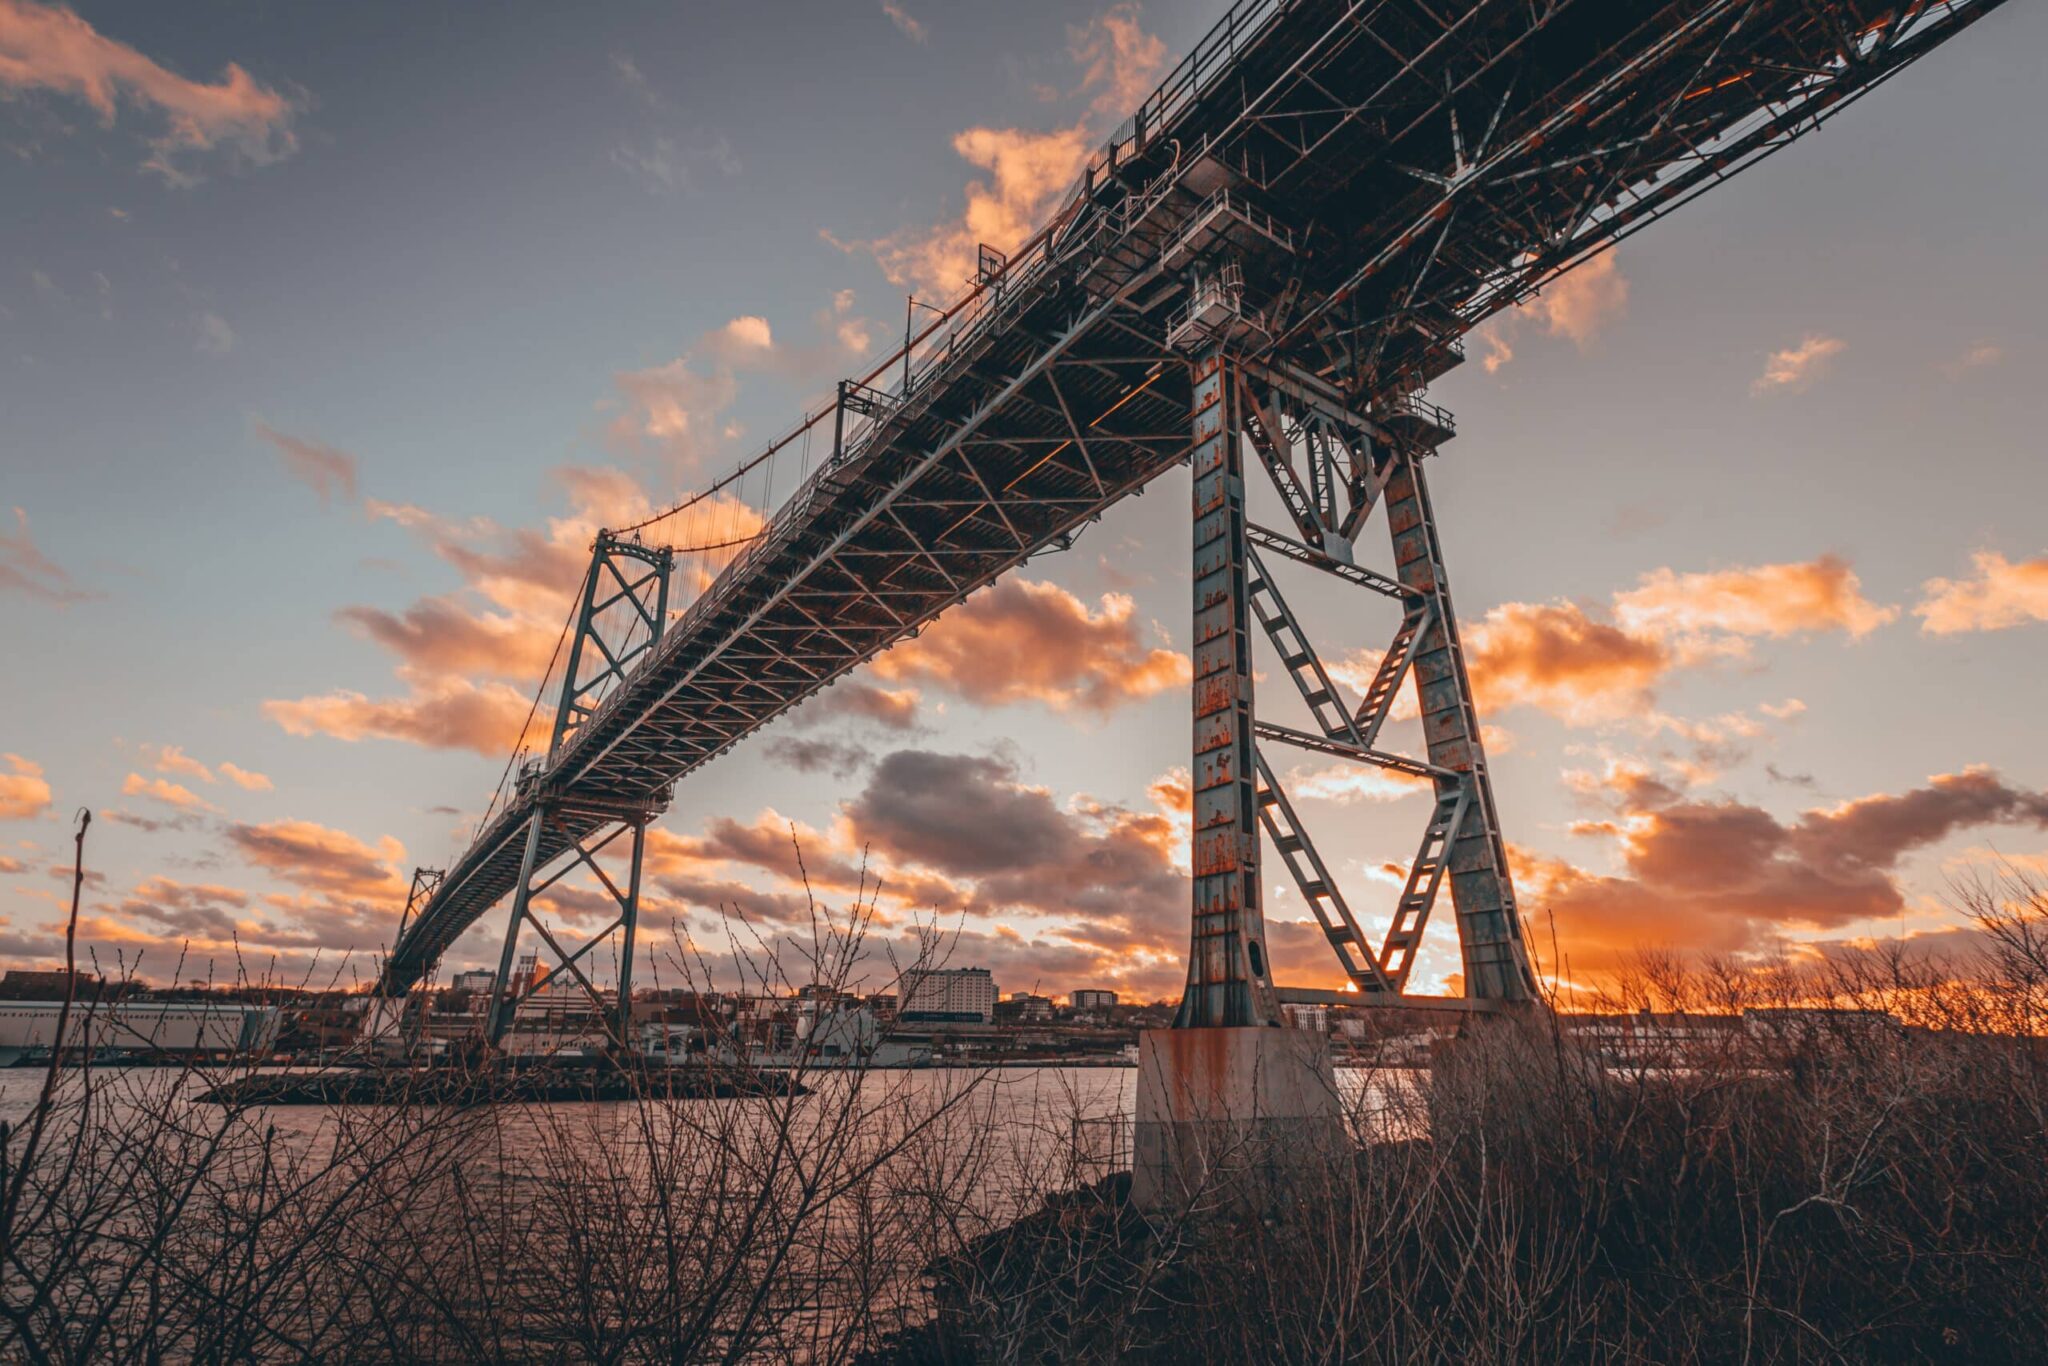 The Macdonald Bridge in Halifax is seen from underneath at sunset.